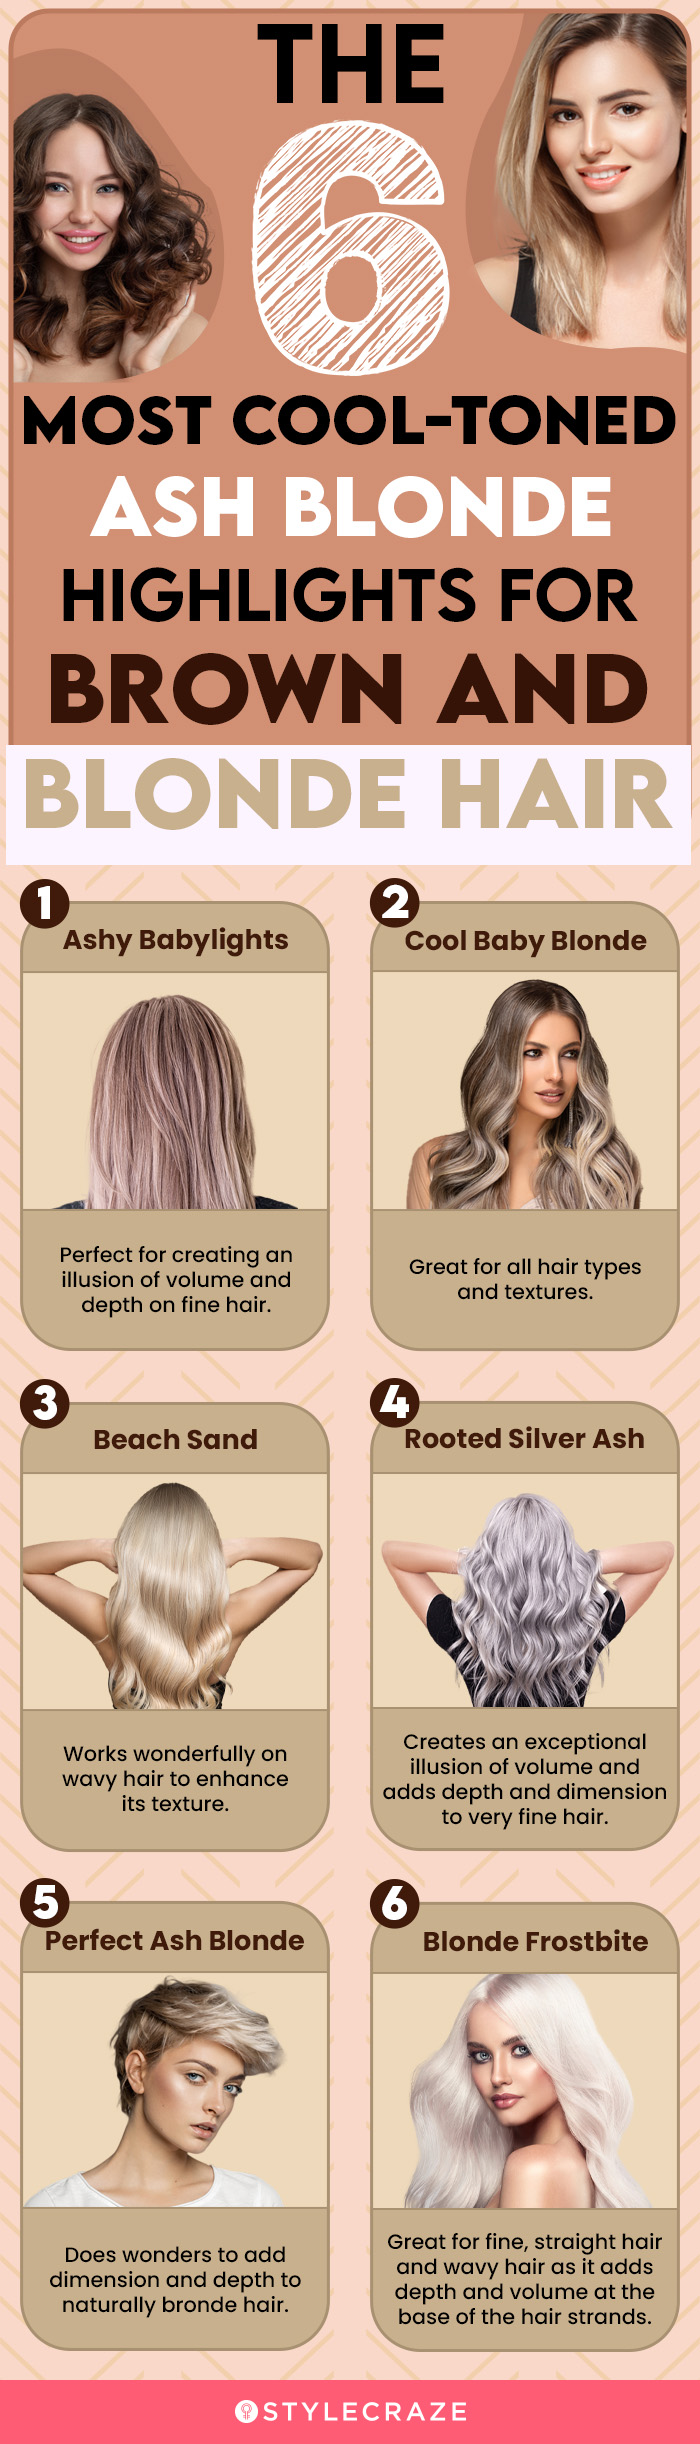 The 6 Most Cool-Toned Ash Blonde Highlights For Brown And Blonde Hair (infographic)